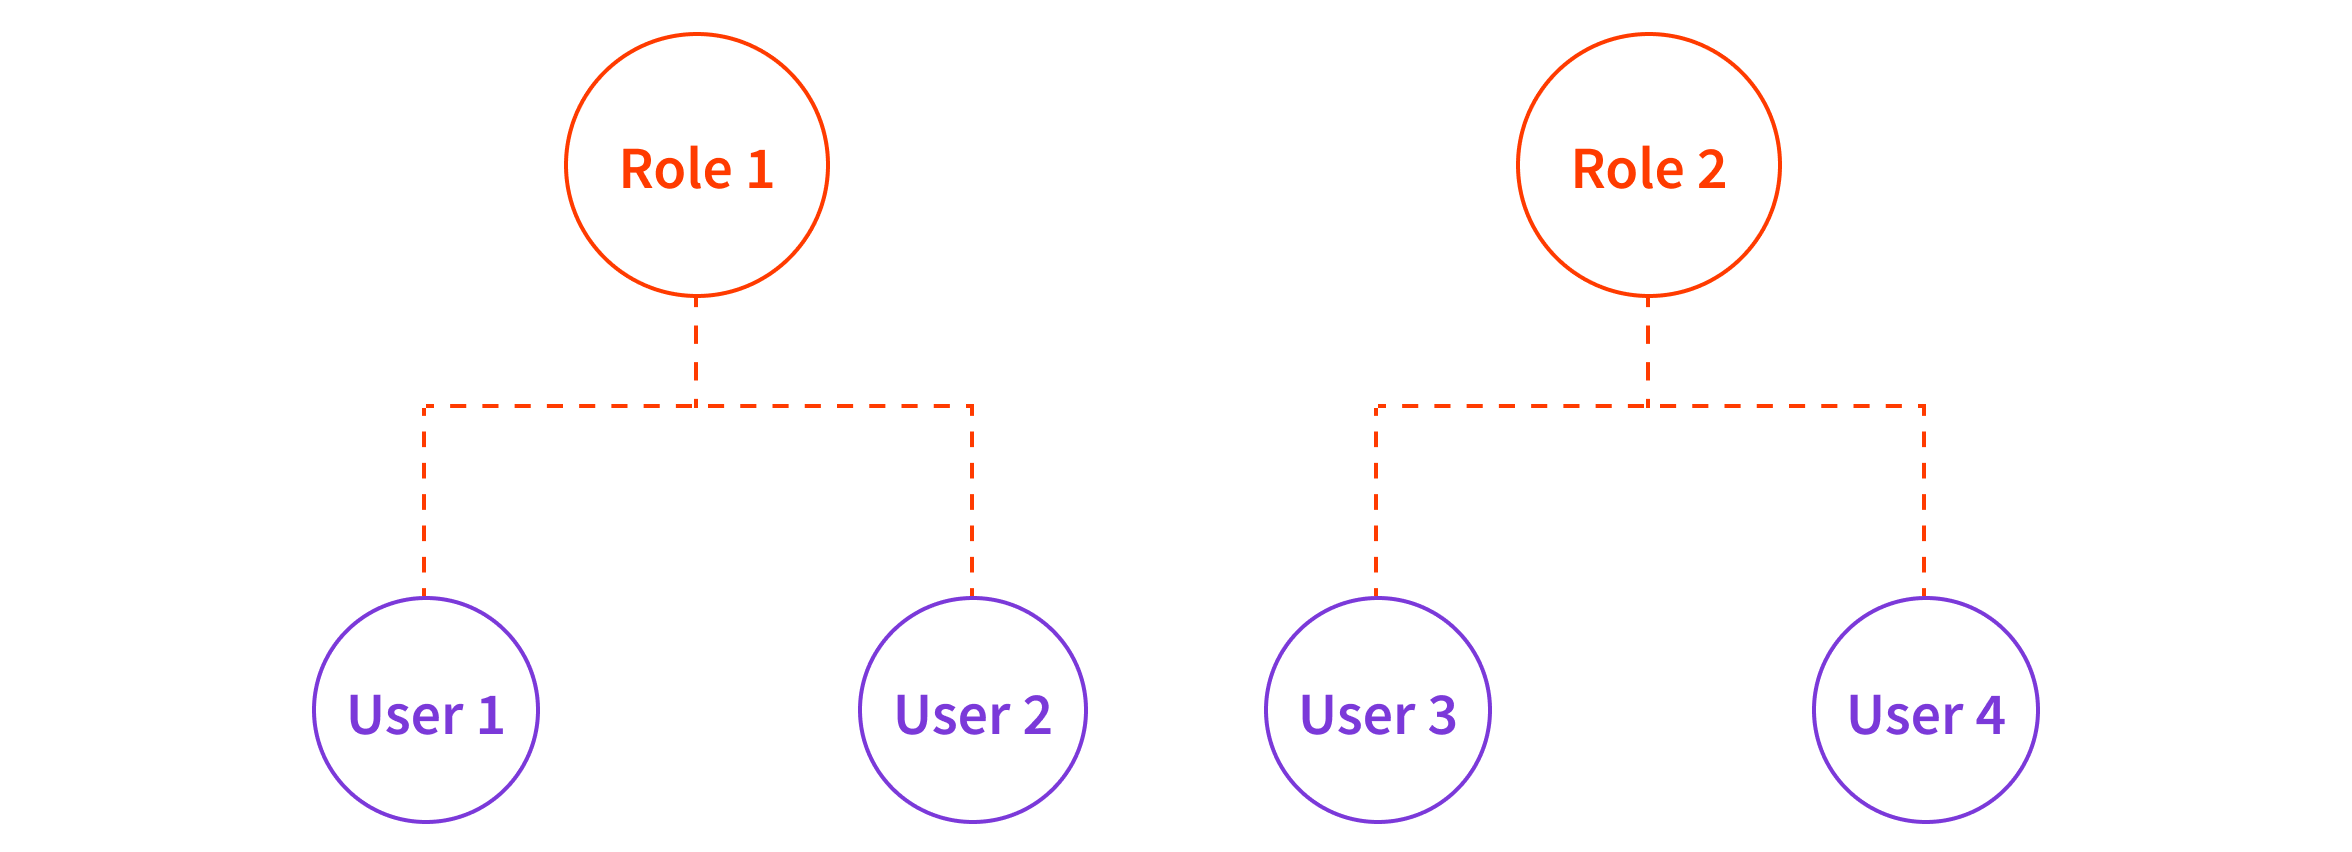 Roles Assigned To Users